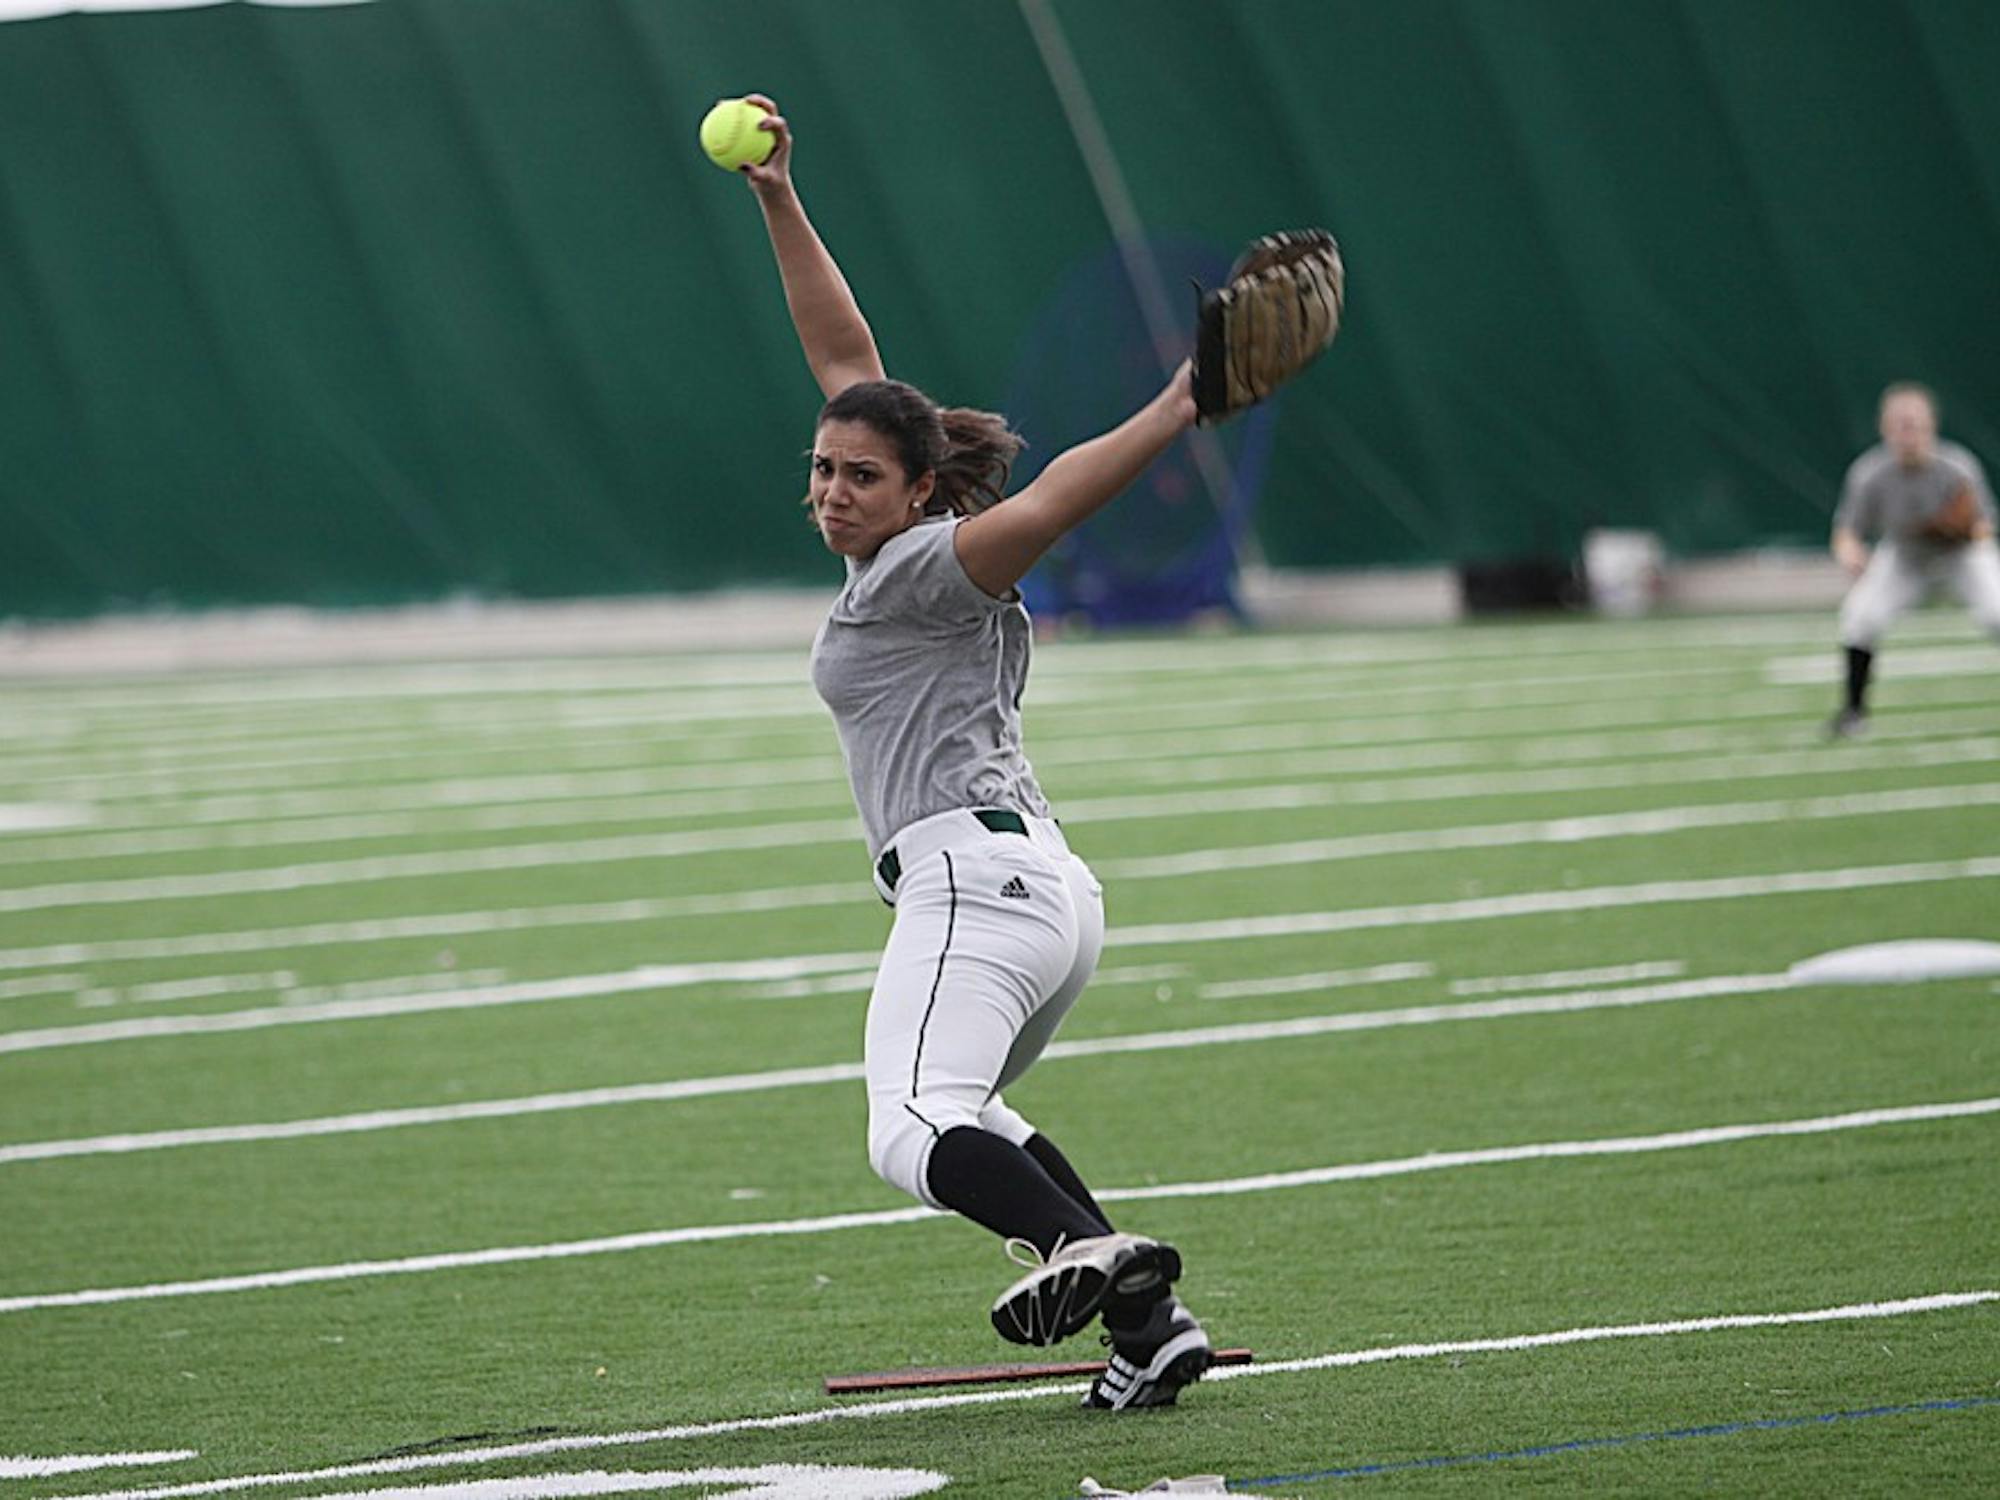 Senior Jaclyn Caro warms up for the upcoming softball season. Caro finished with a 1-5 record last season.